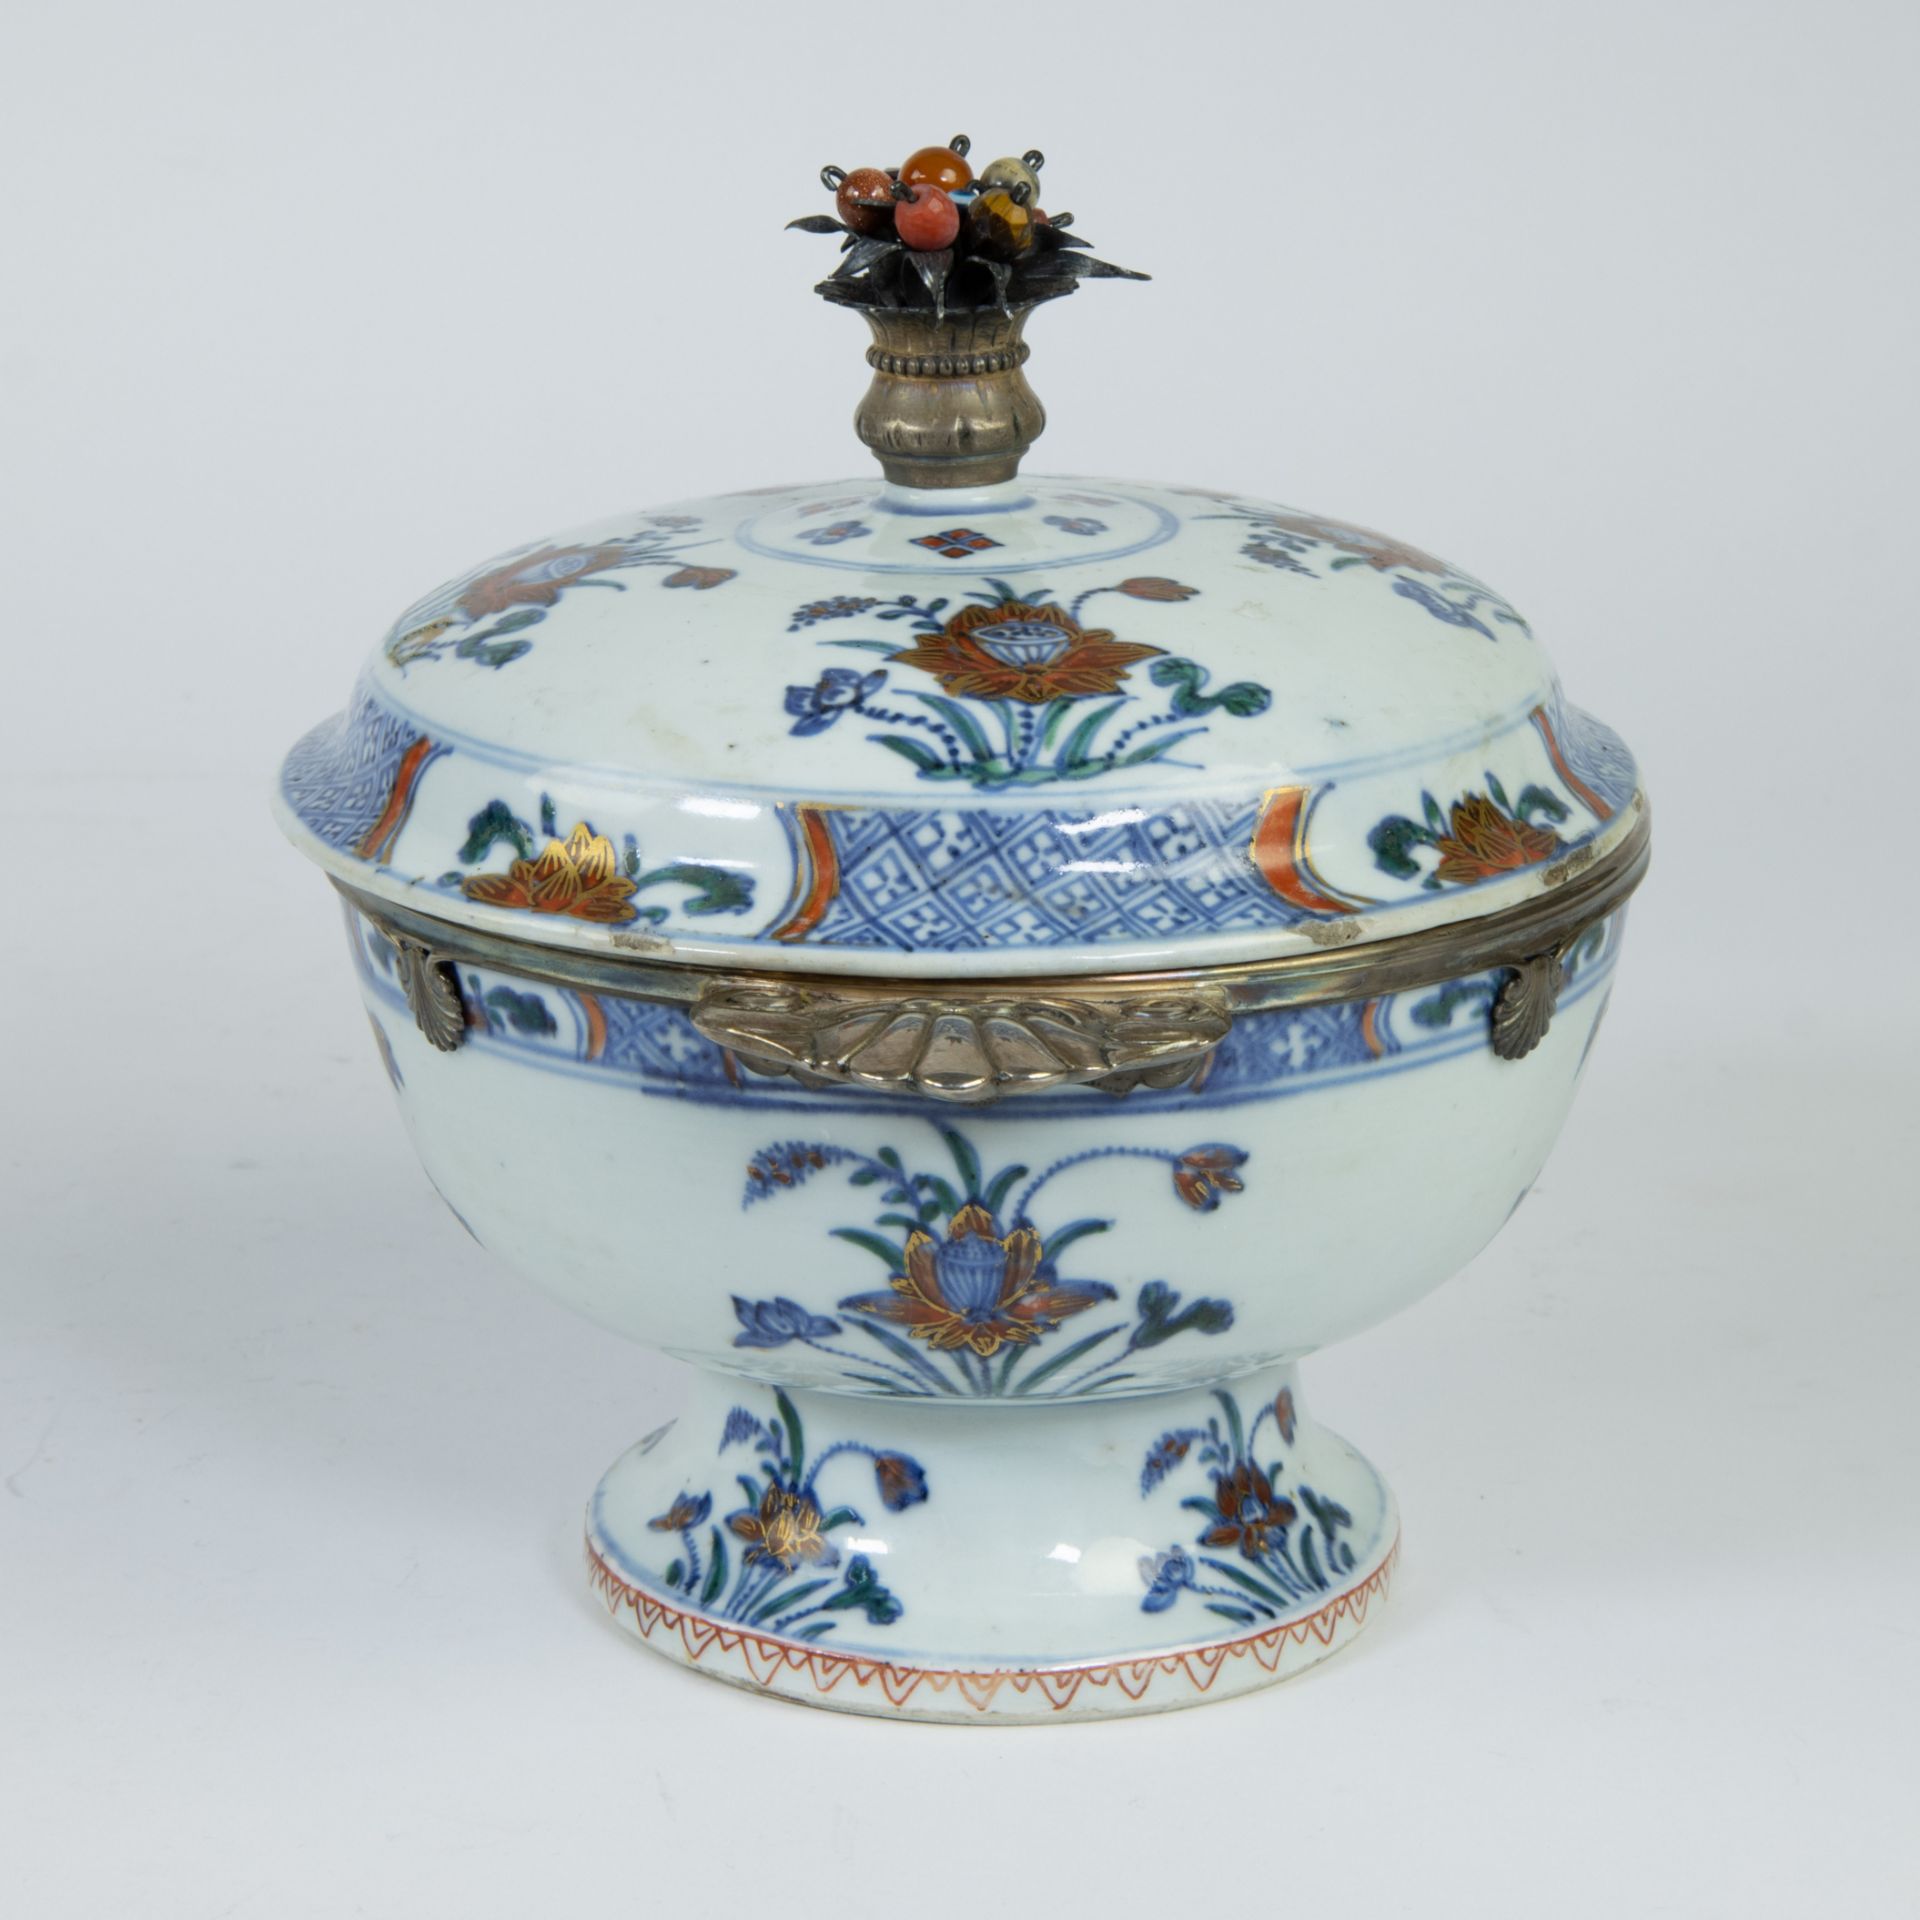 Chinese porcelain lidded pot with silver fittings, Imari, 18th century - Image 4 of 7